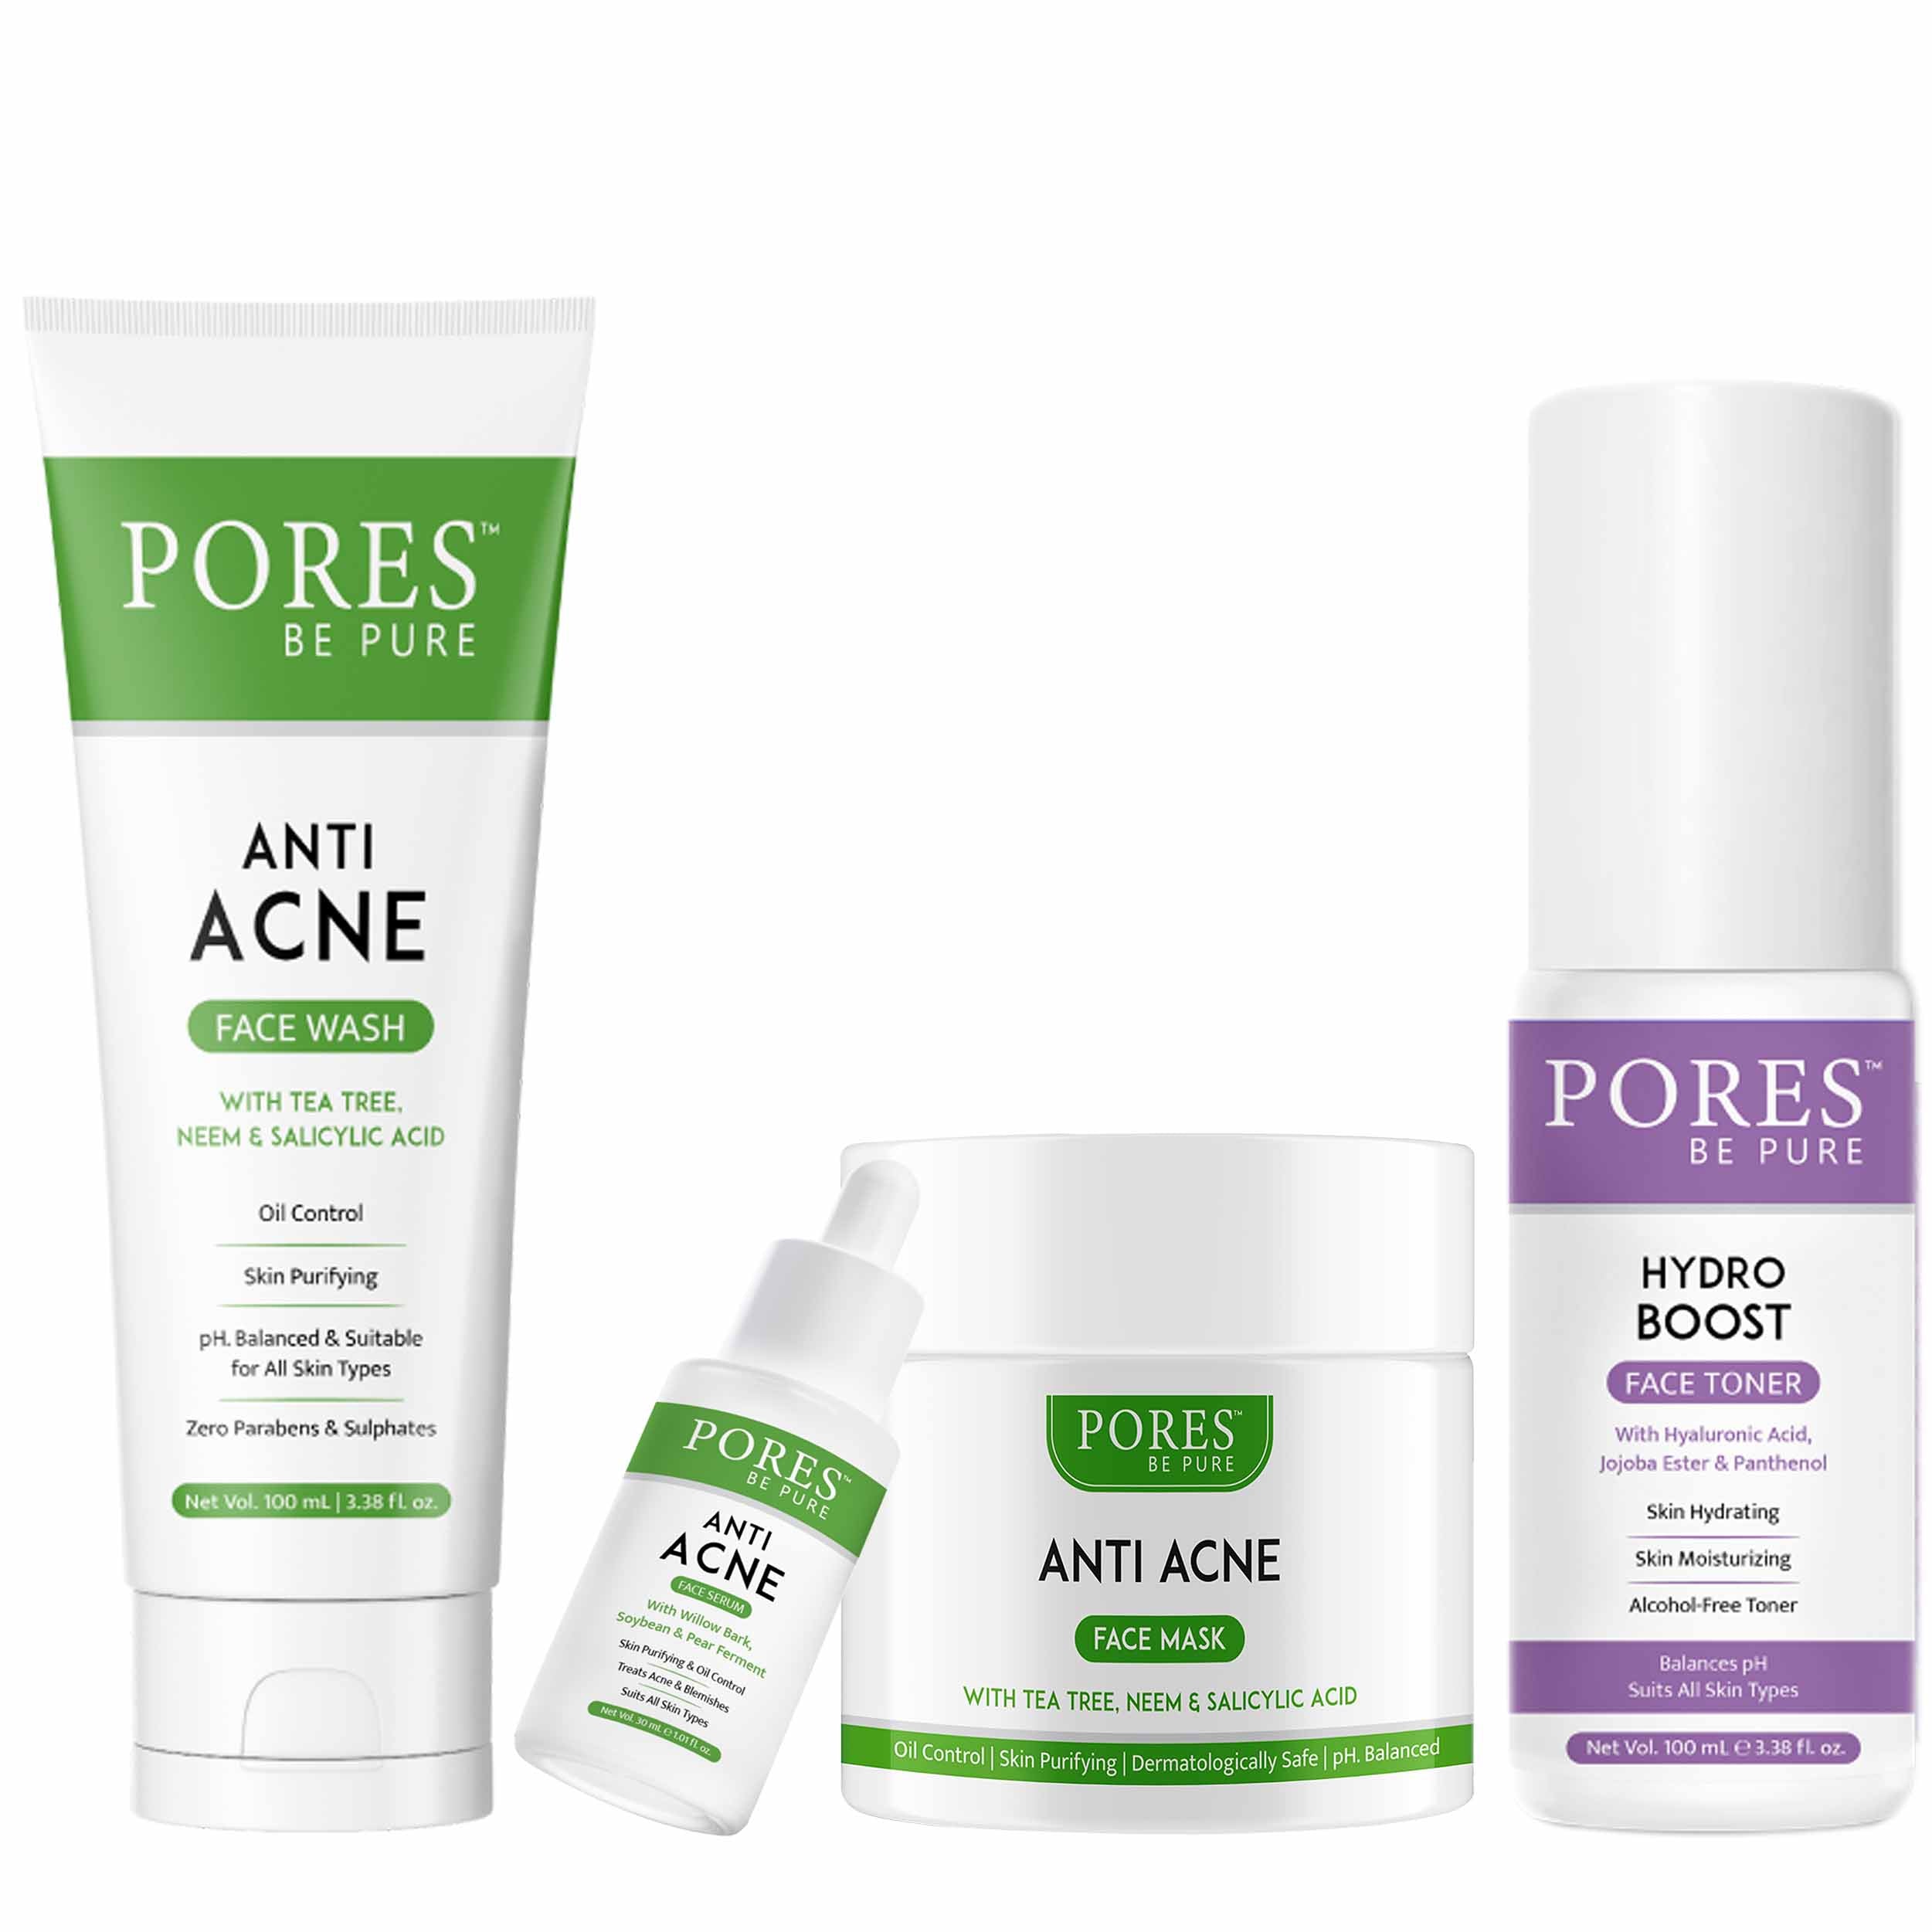 Anti Acne Face Wash + Face Serum + Face Mask + Hydro Boost Face Toner by PORES BE PURE